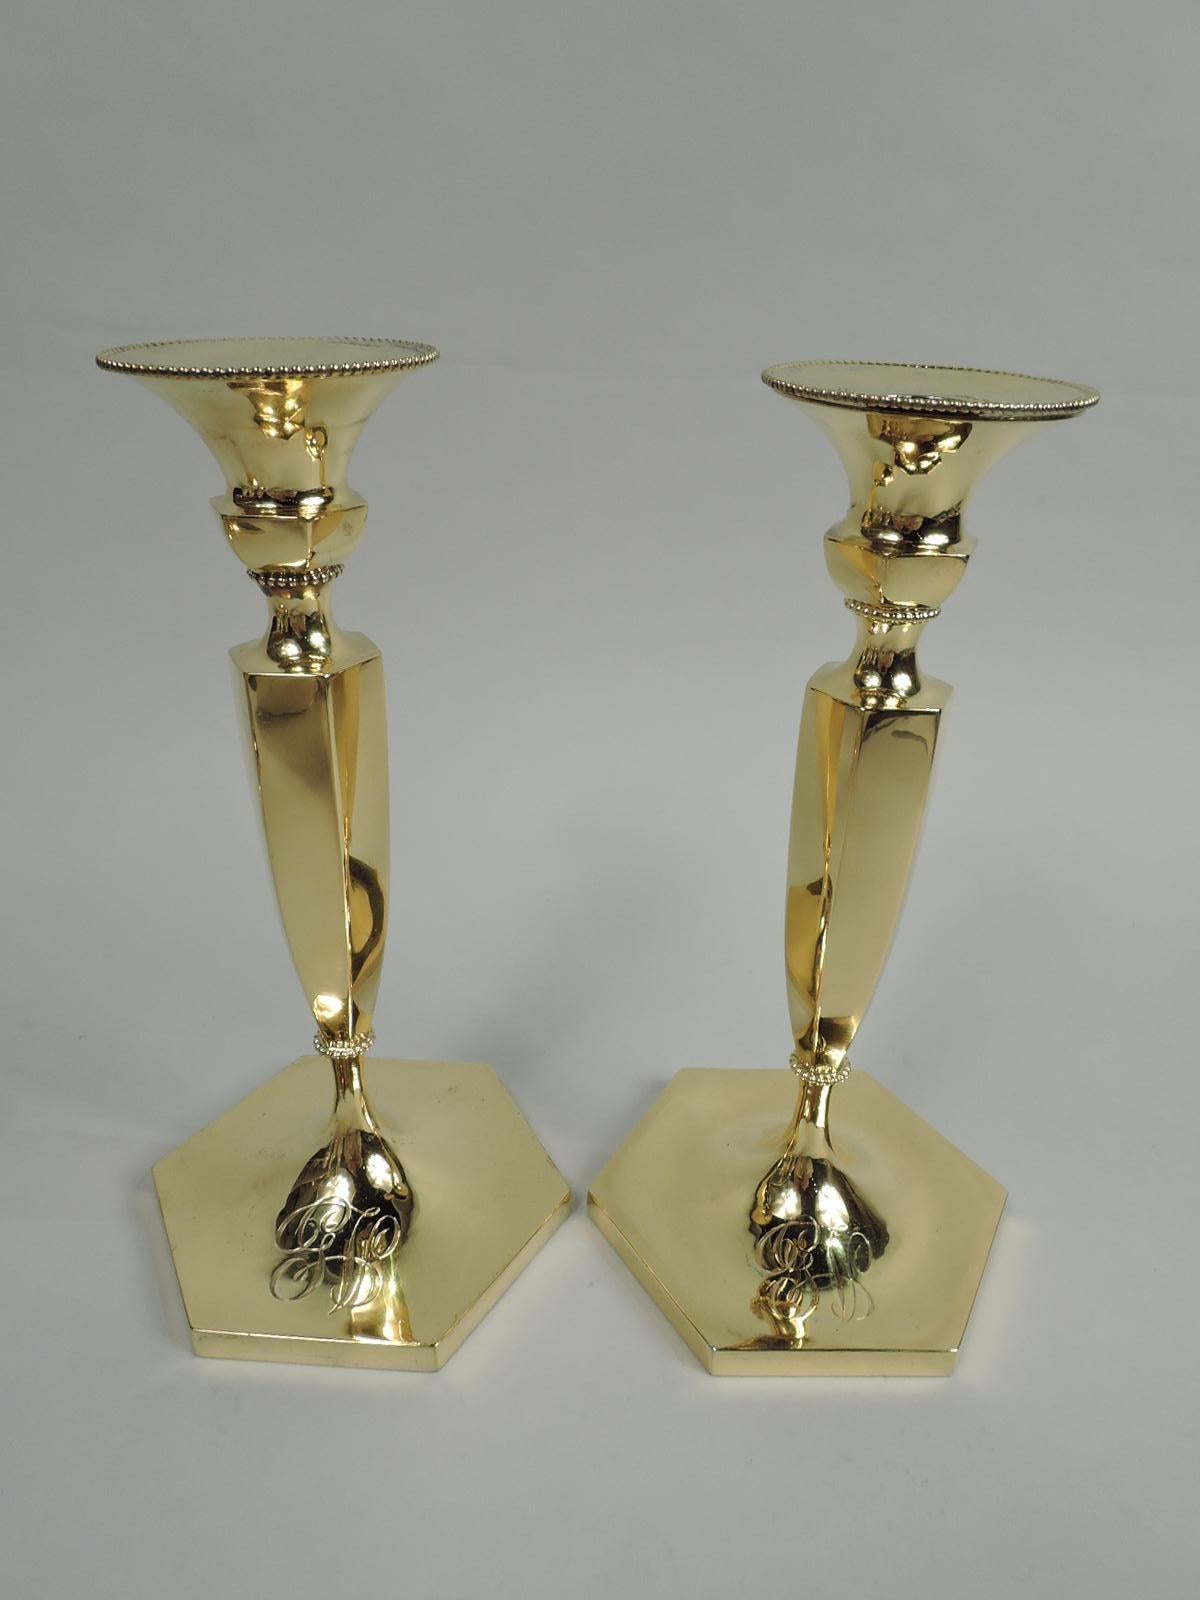 Victorian Set of 4 Antique Gilt Sterling Silver Candlesticks by New York Maker